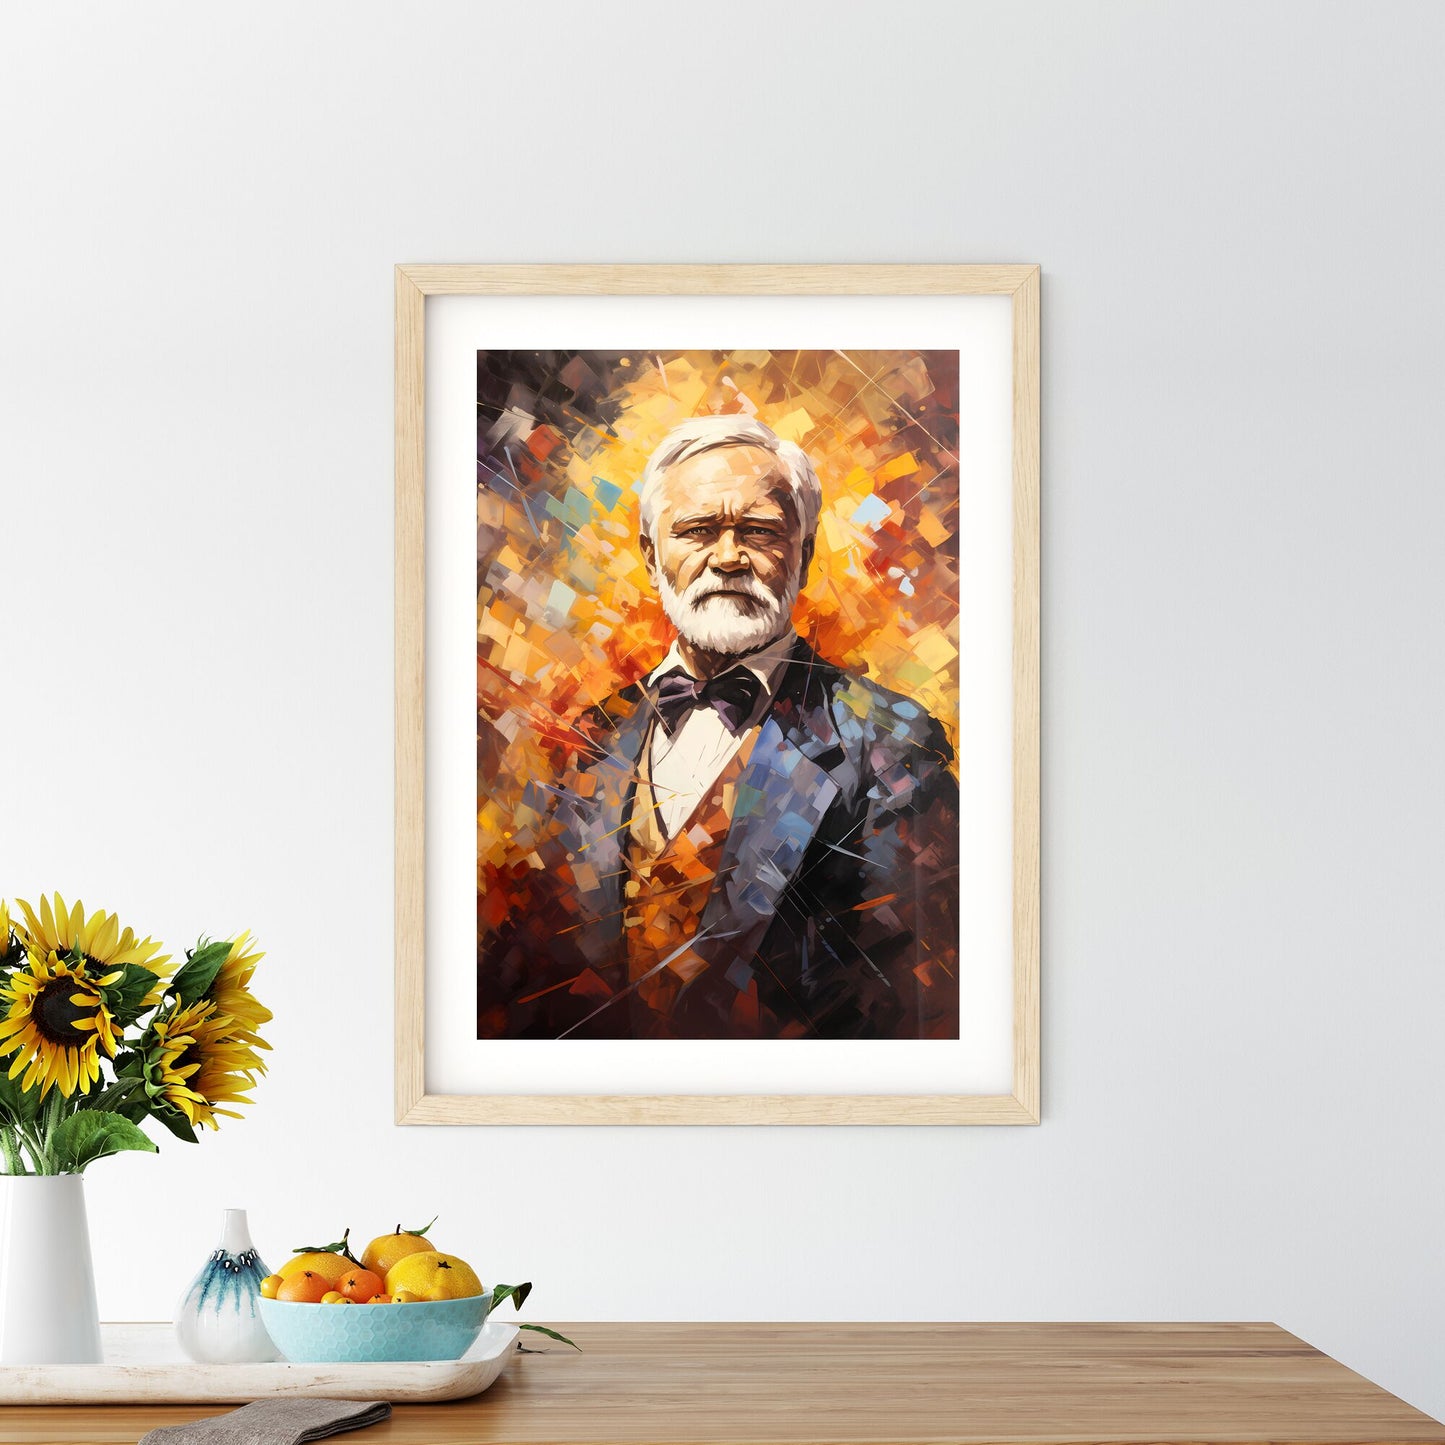 Andrew Carnegie - A Painting Of A Man With A White Beard Default Title